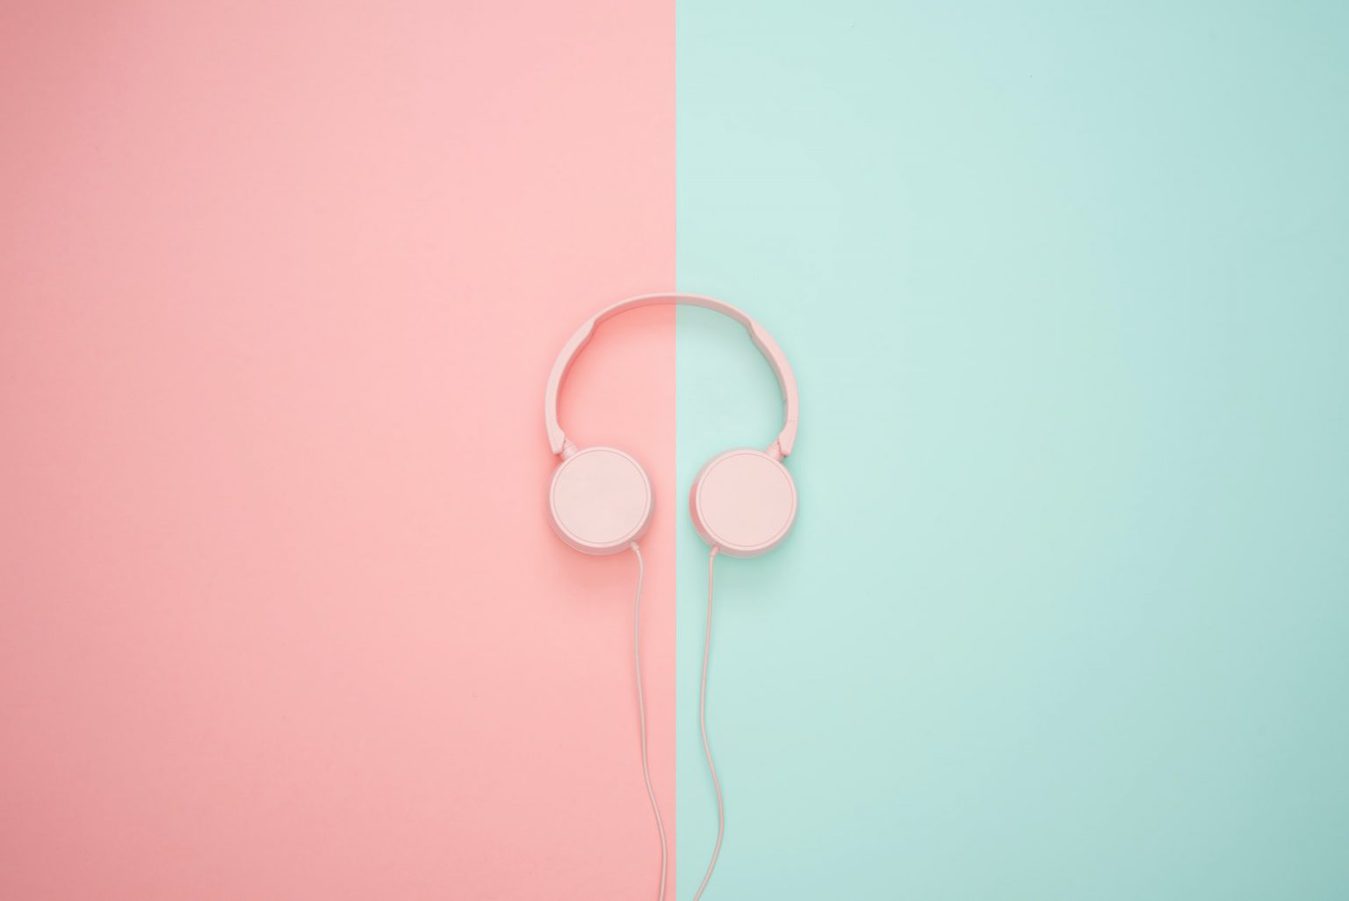 Pink headphones against a split mint and pink background